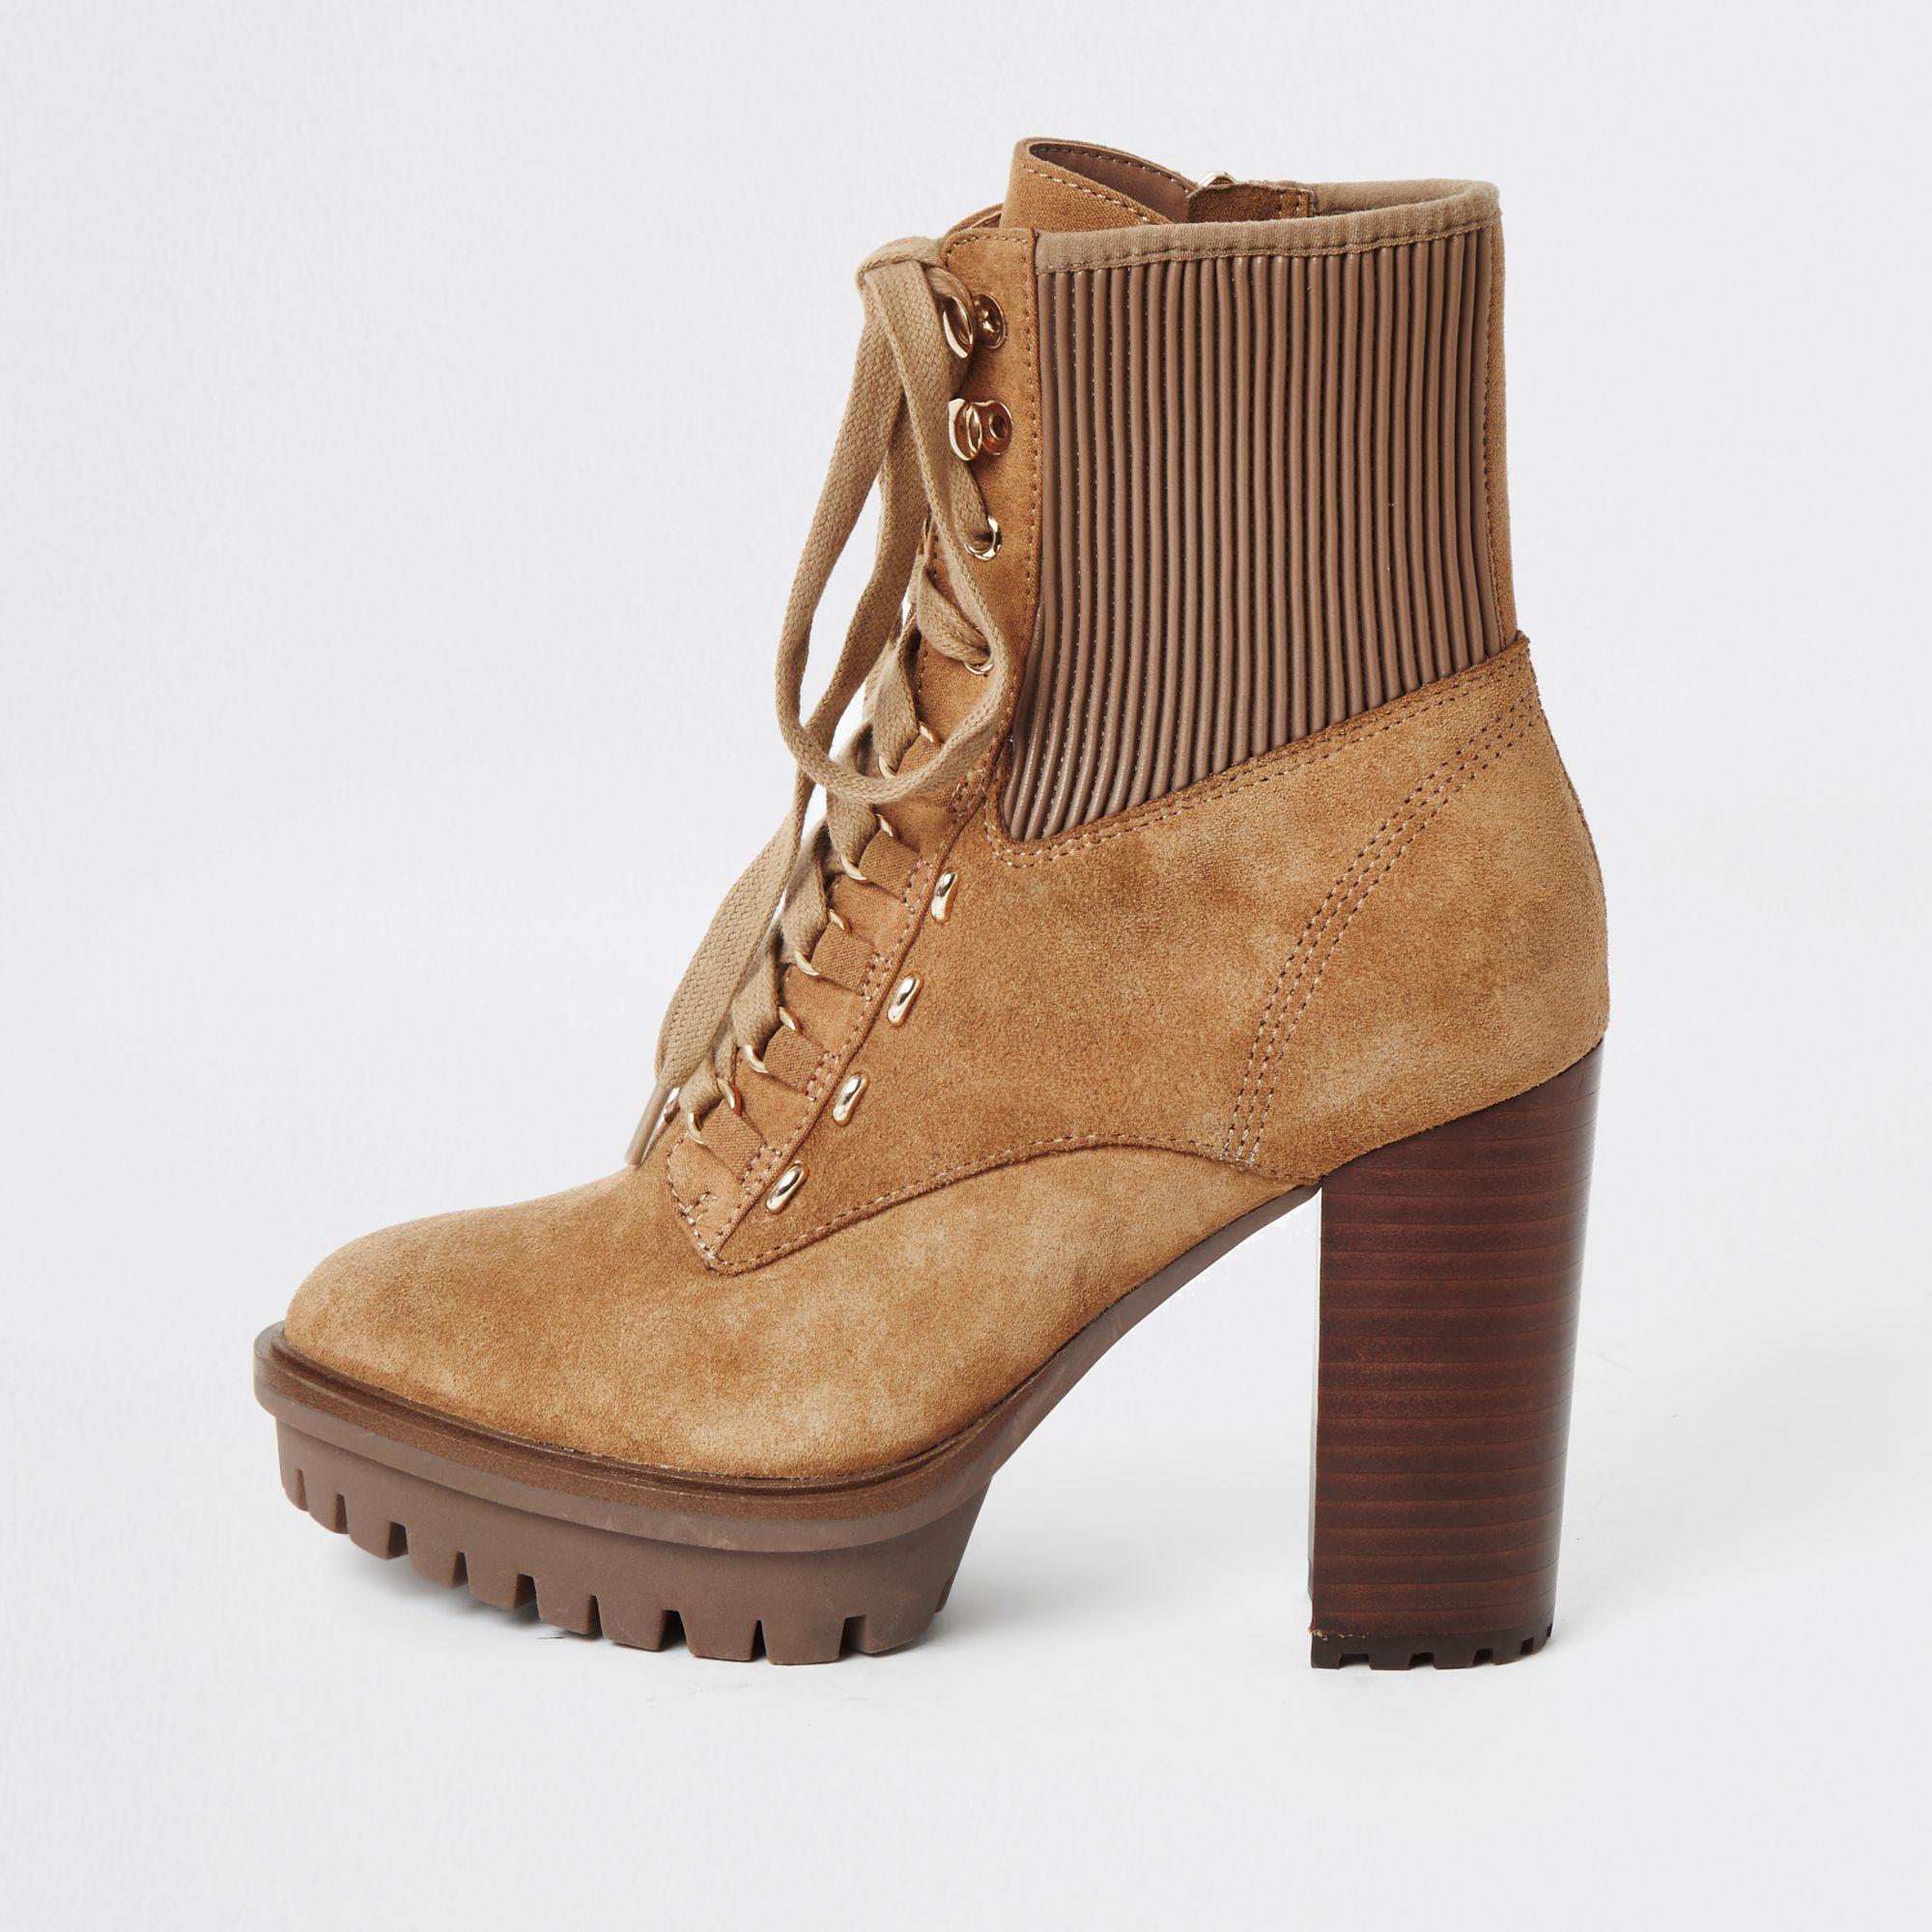 River Island Beige Lace-up High Heeled Hiker Boots in Natural - Lyst